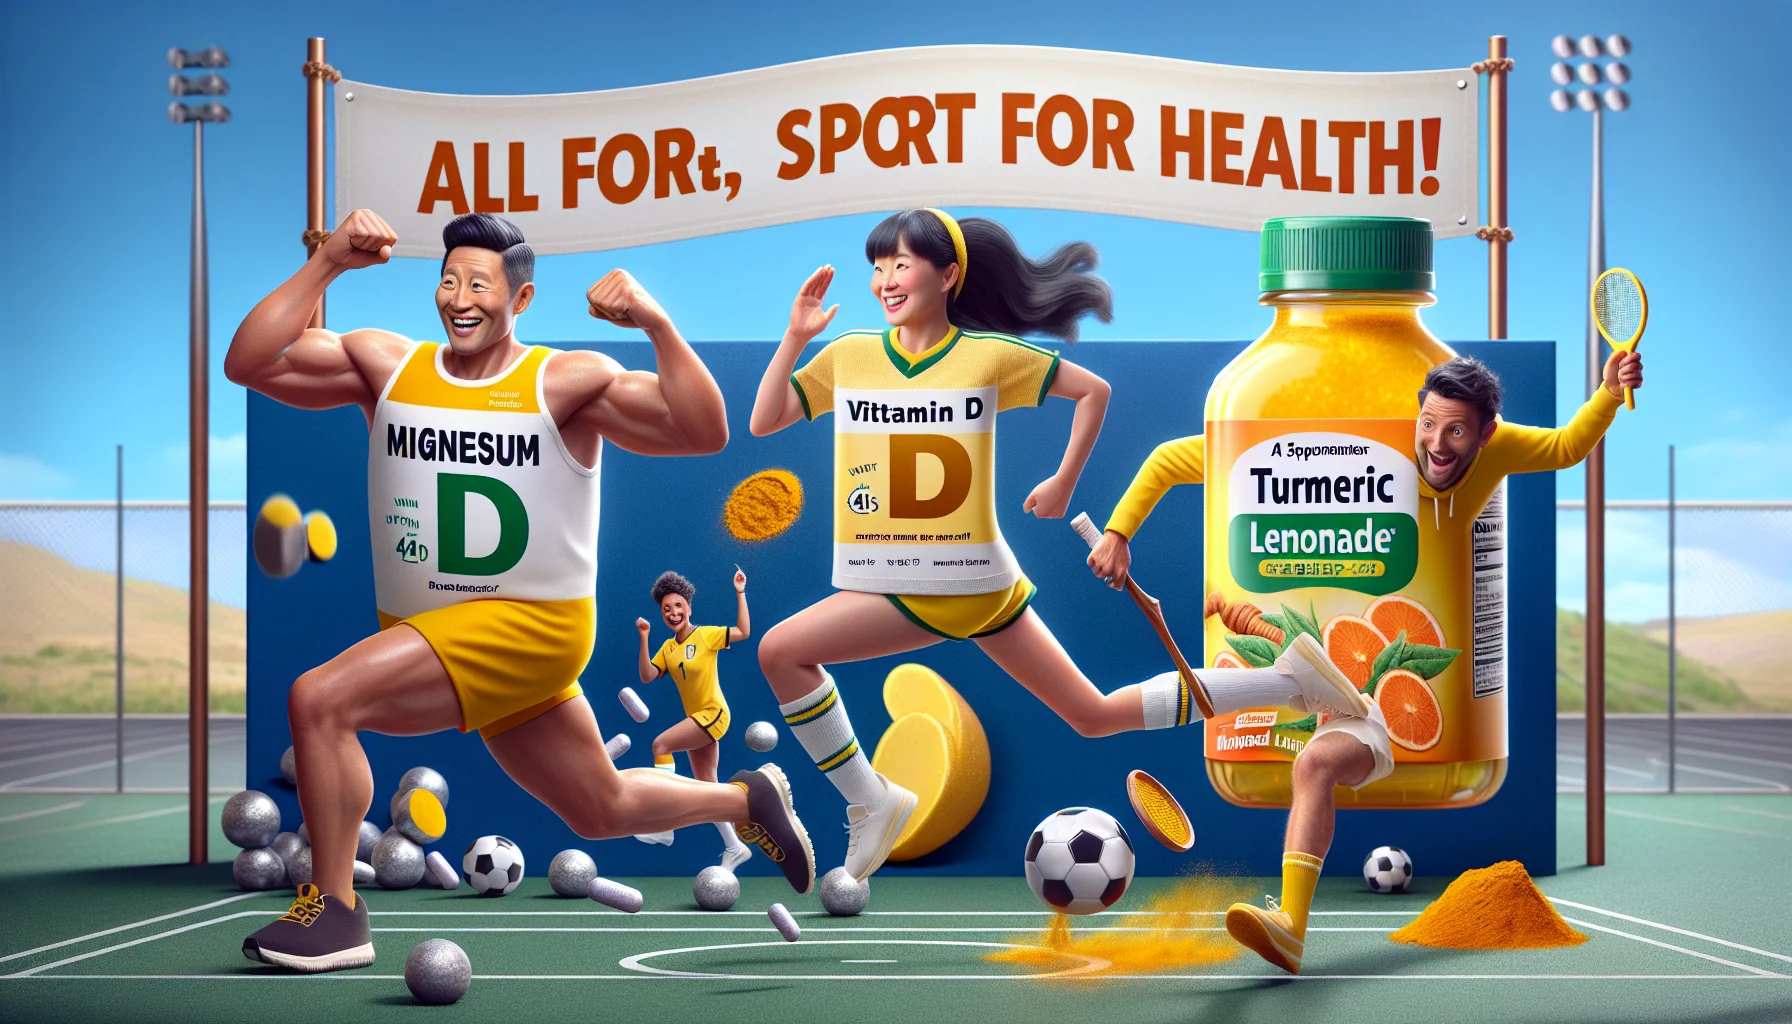 Create an image of a humorous scene featuring vitamin D, magnesium, and turmeric lemonade in a sports setting. Visualize these personified supplements engaging in friendly competition with each other. Magnesium, personified as a muscular athlete of Asian descent wears a runner's outfit, while Vitamin D, personified as a lively soccer player of Hispanic descent, actively chases a soccer ball. Turmeric Lemonade, taking form of a Caucasian, cheerful tennis player is elegantly geared up. A banner in the background reads 'All for Sport, Sport for Health!' This image should inspire people to incorporate these supplements into their active lifestyle.